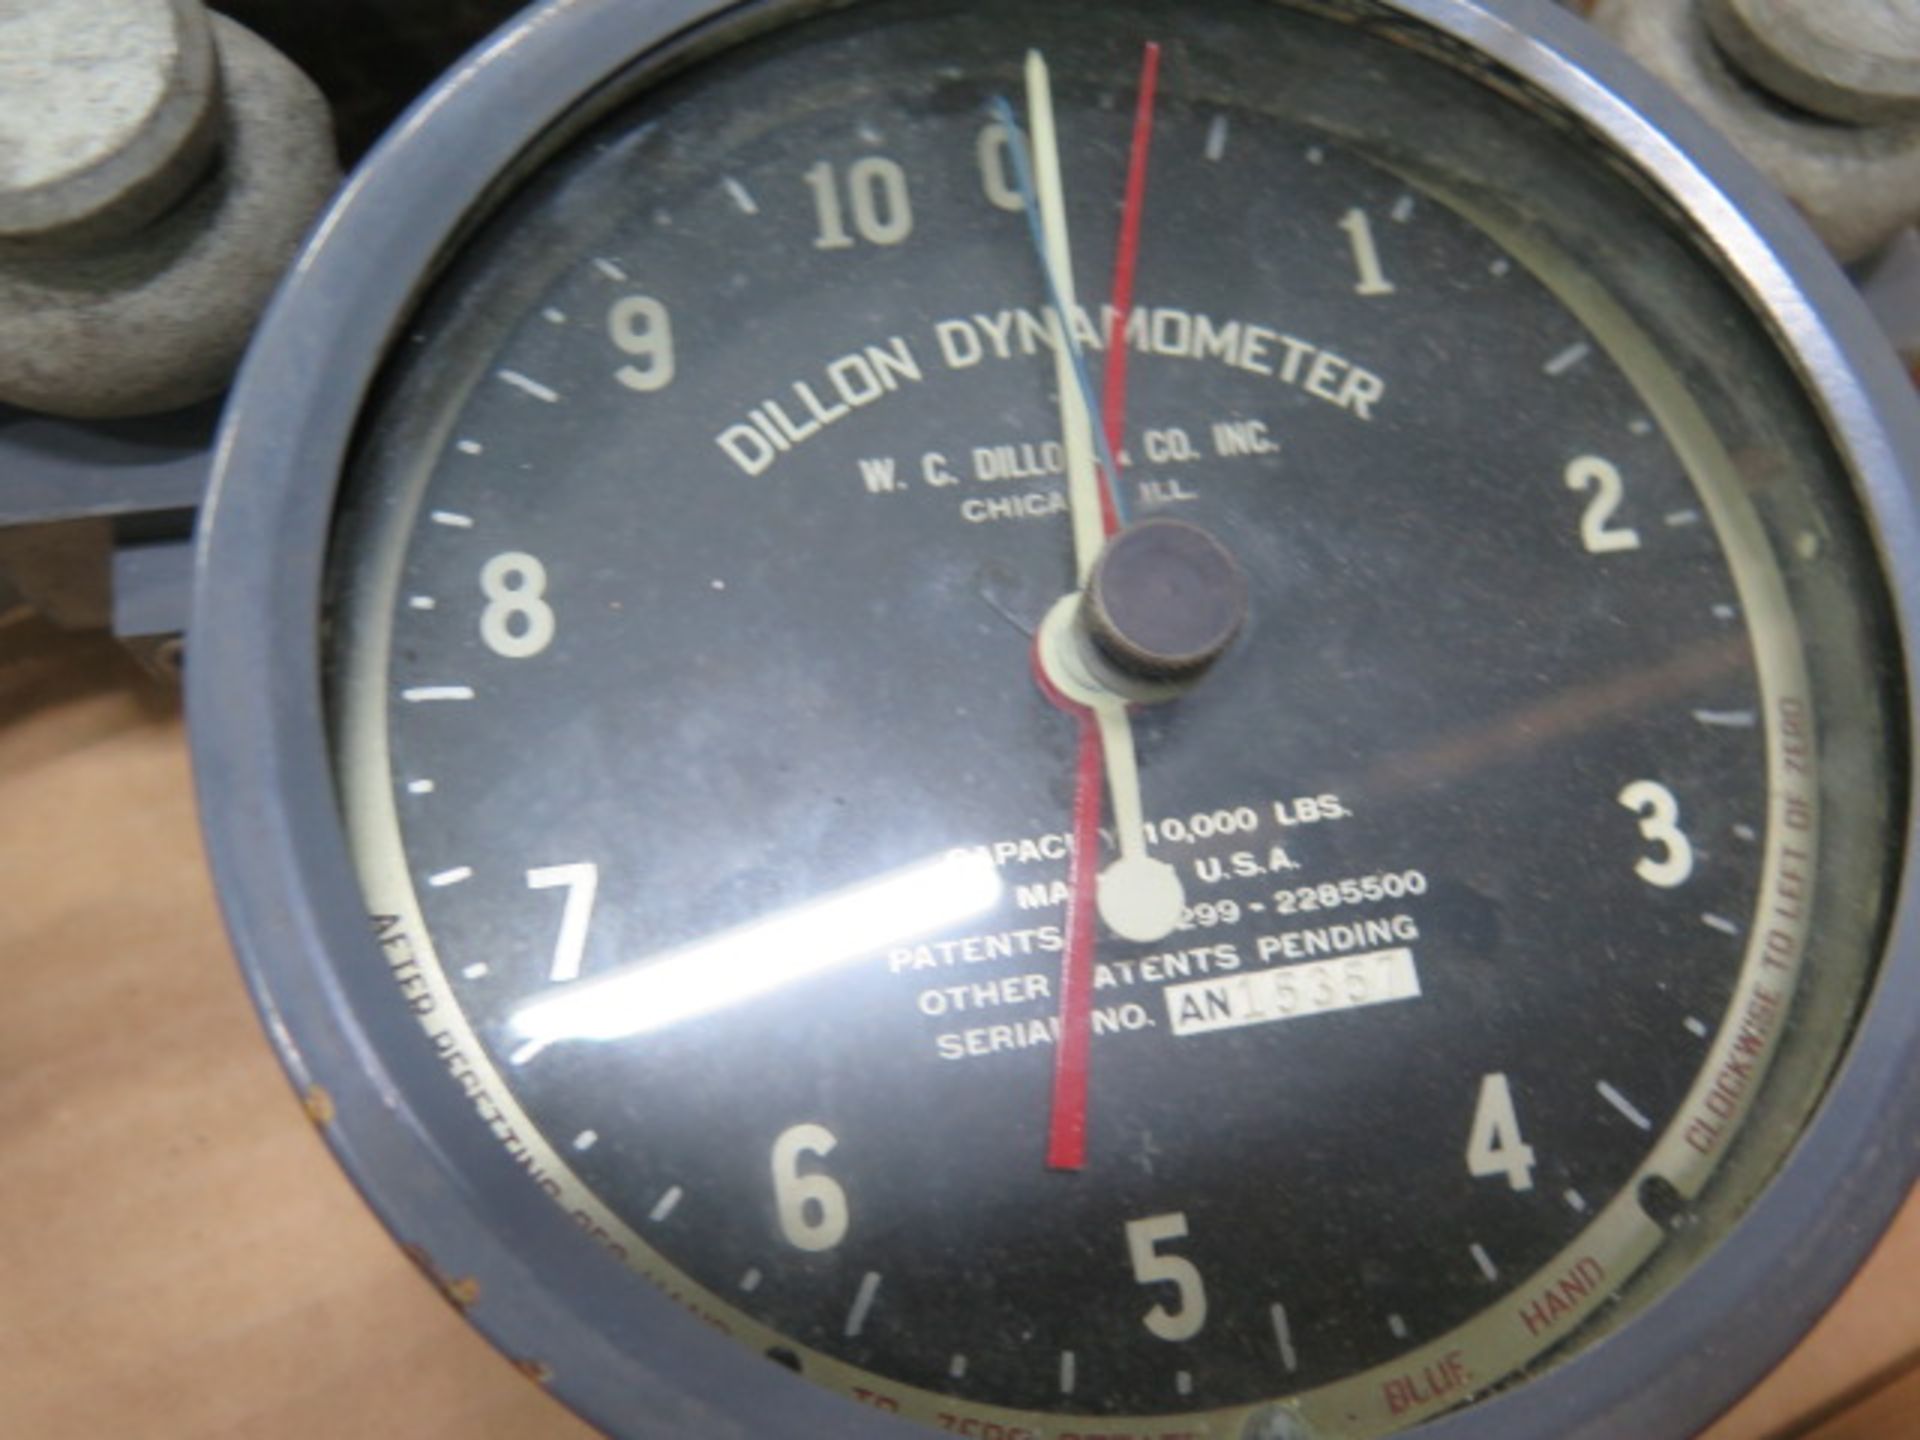 Dillon 10,000 Lb Cap Dynamometer (SOLD AS-IS - NO WARRANTY) - Image 4 of 4